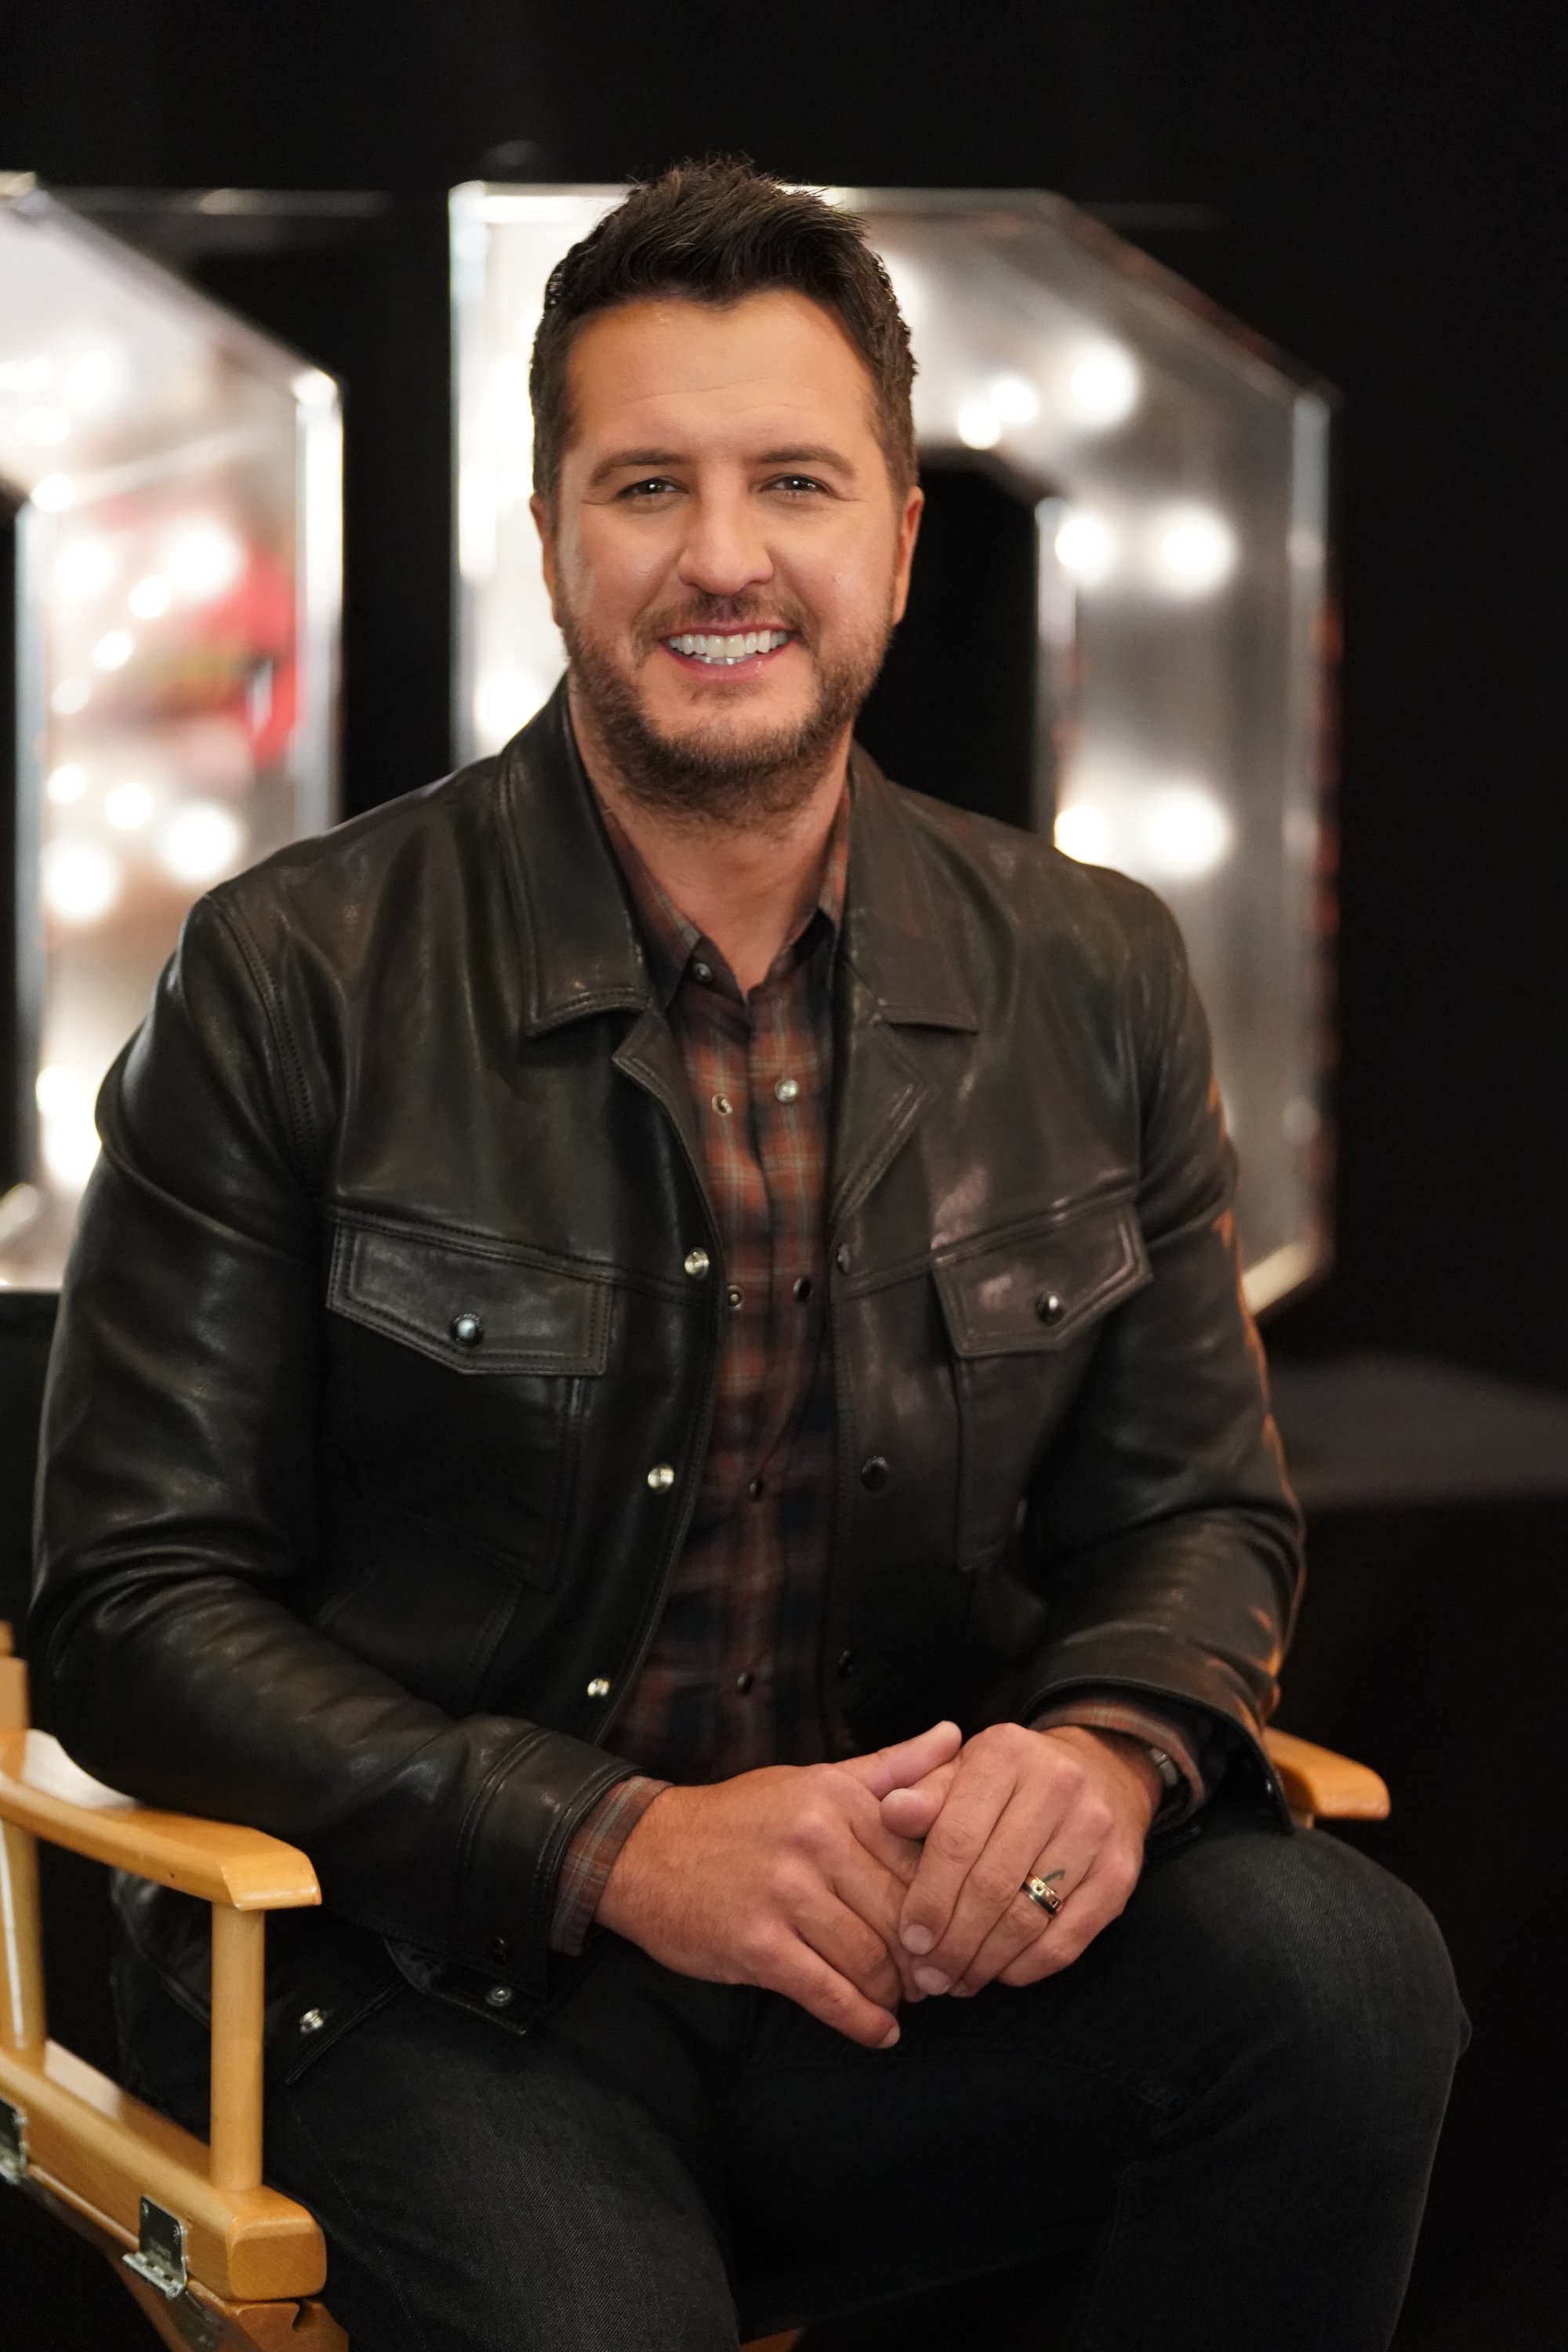 Country singer Luke Bryan during season 4 of the ABC singing contest "american idol" ┃ Source: Getty Images